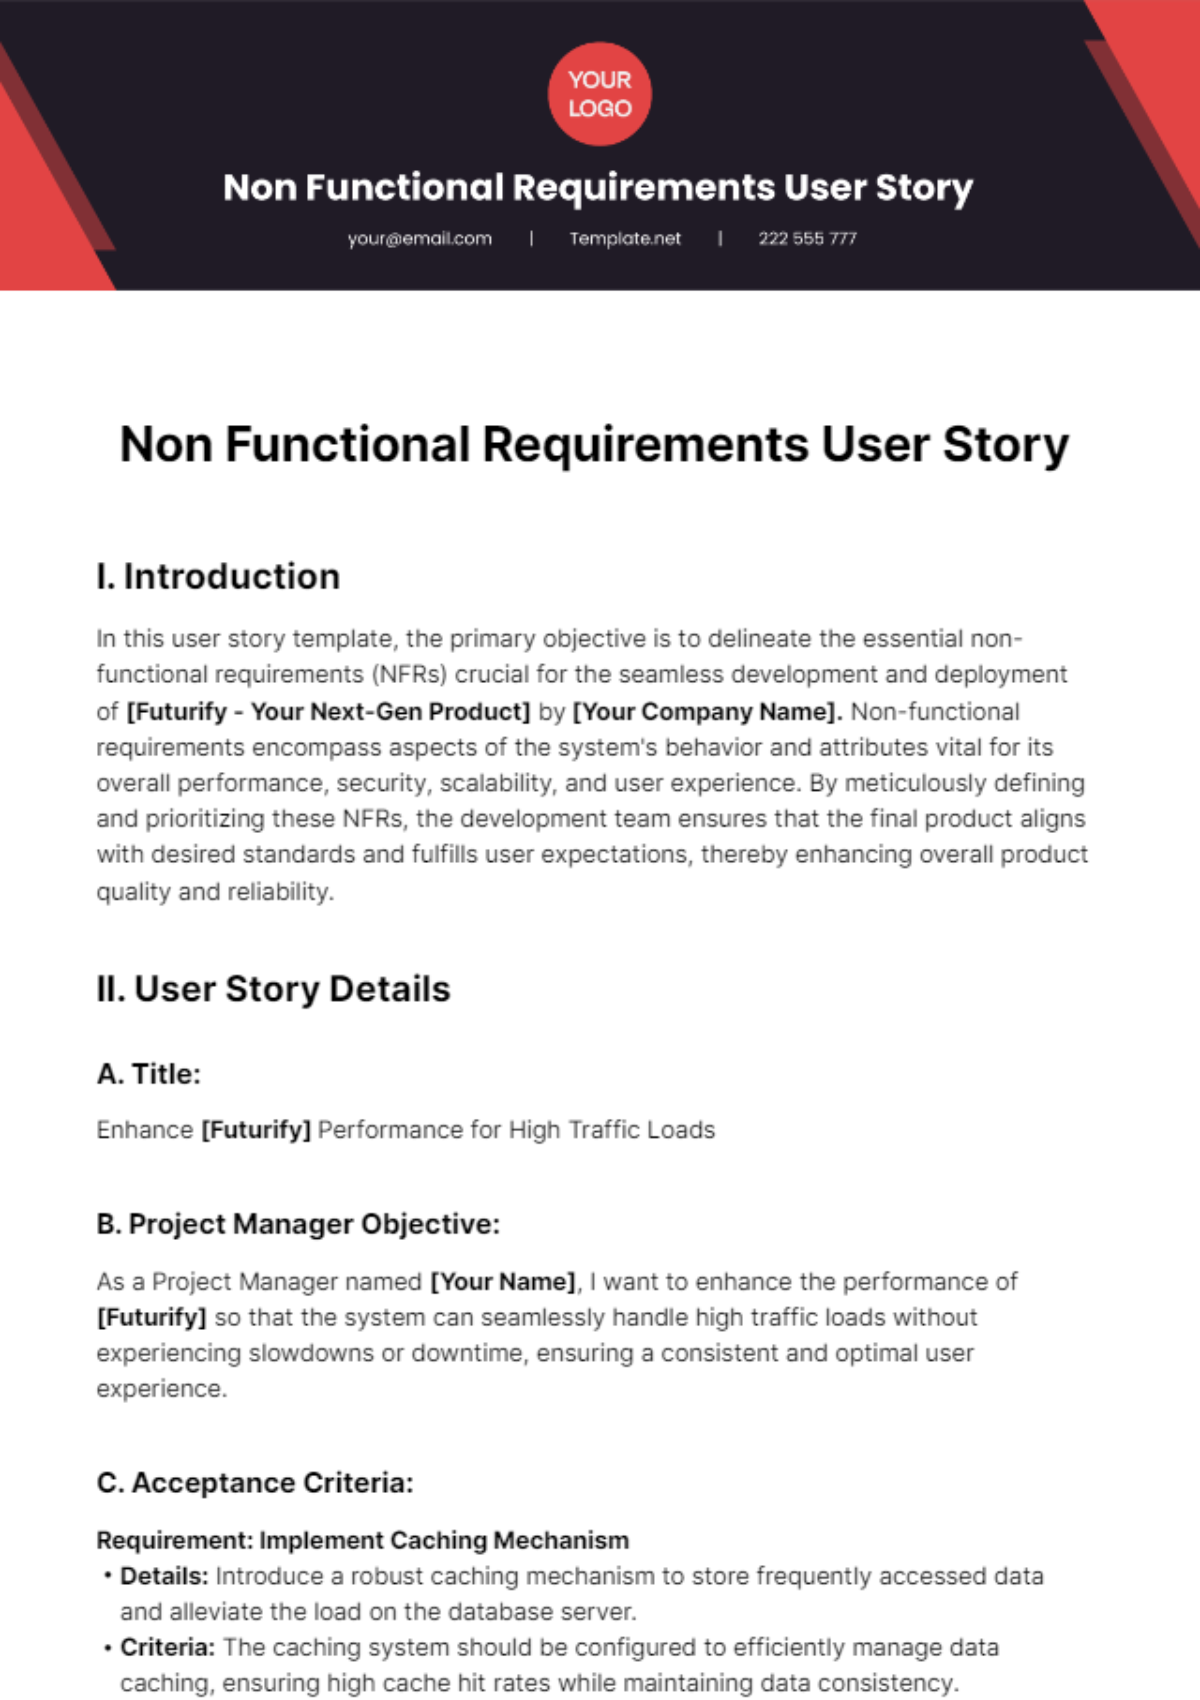 Non Functional Requirements User Story Template